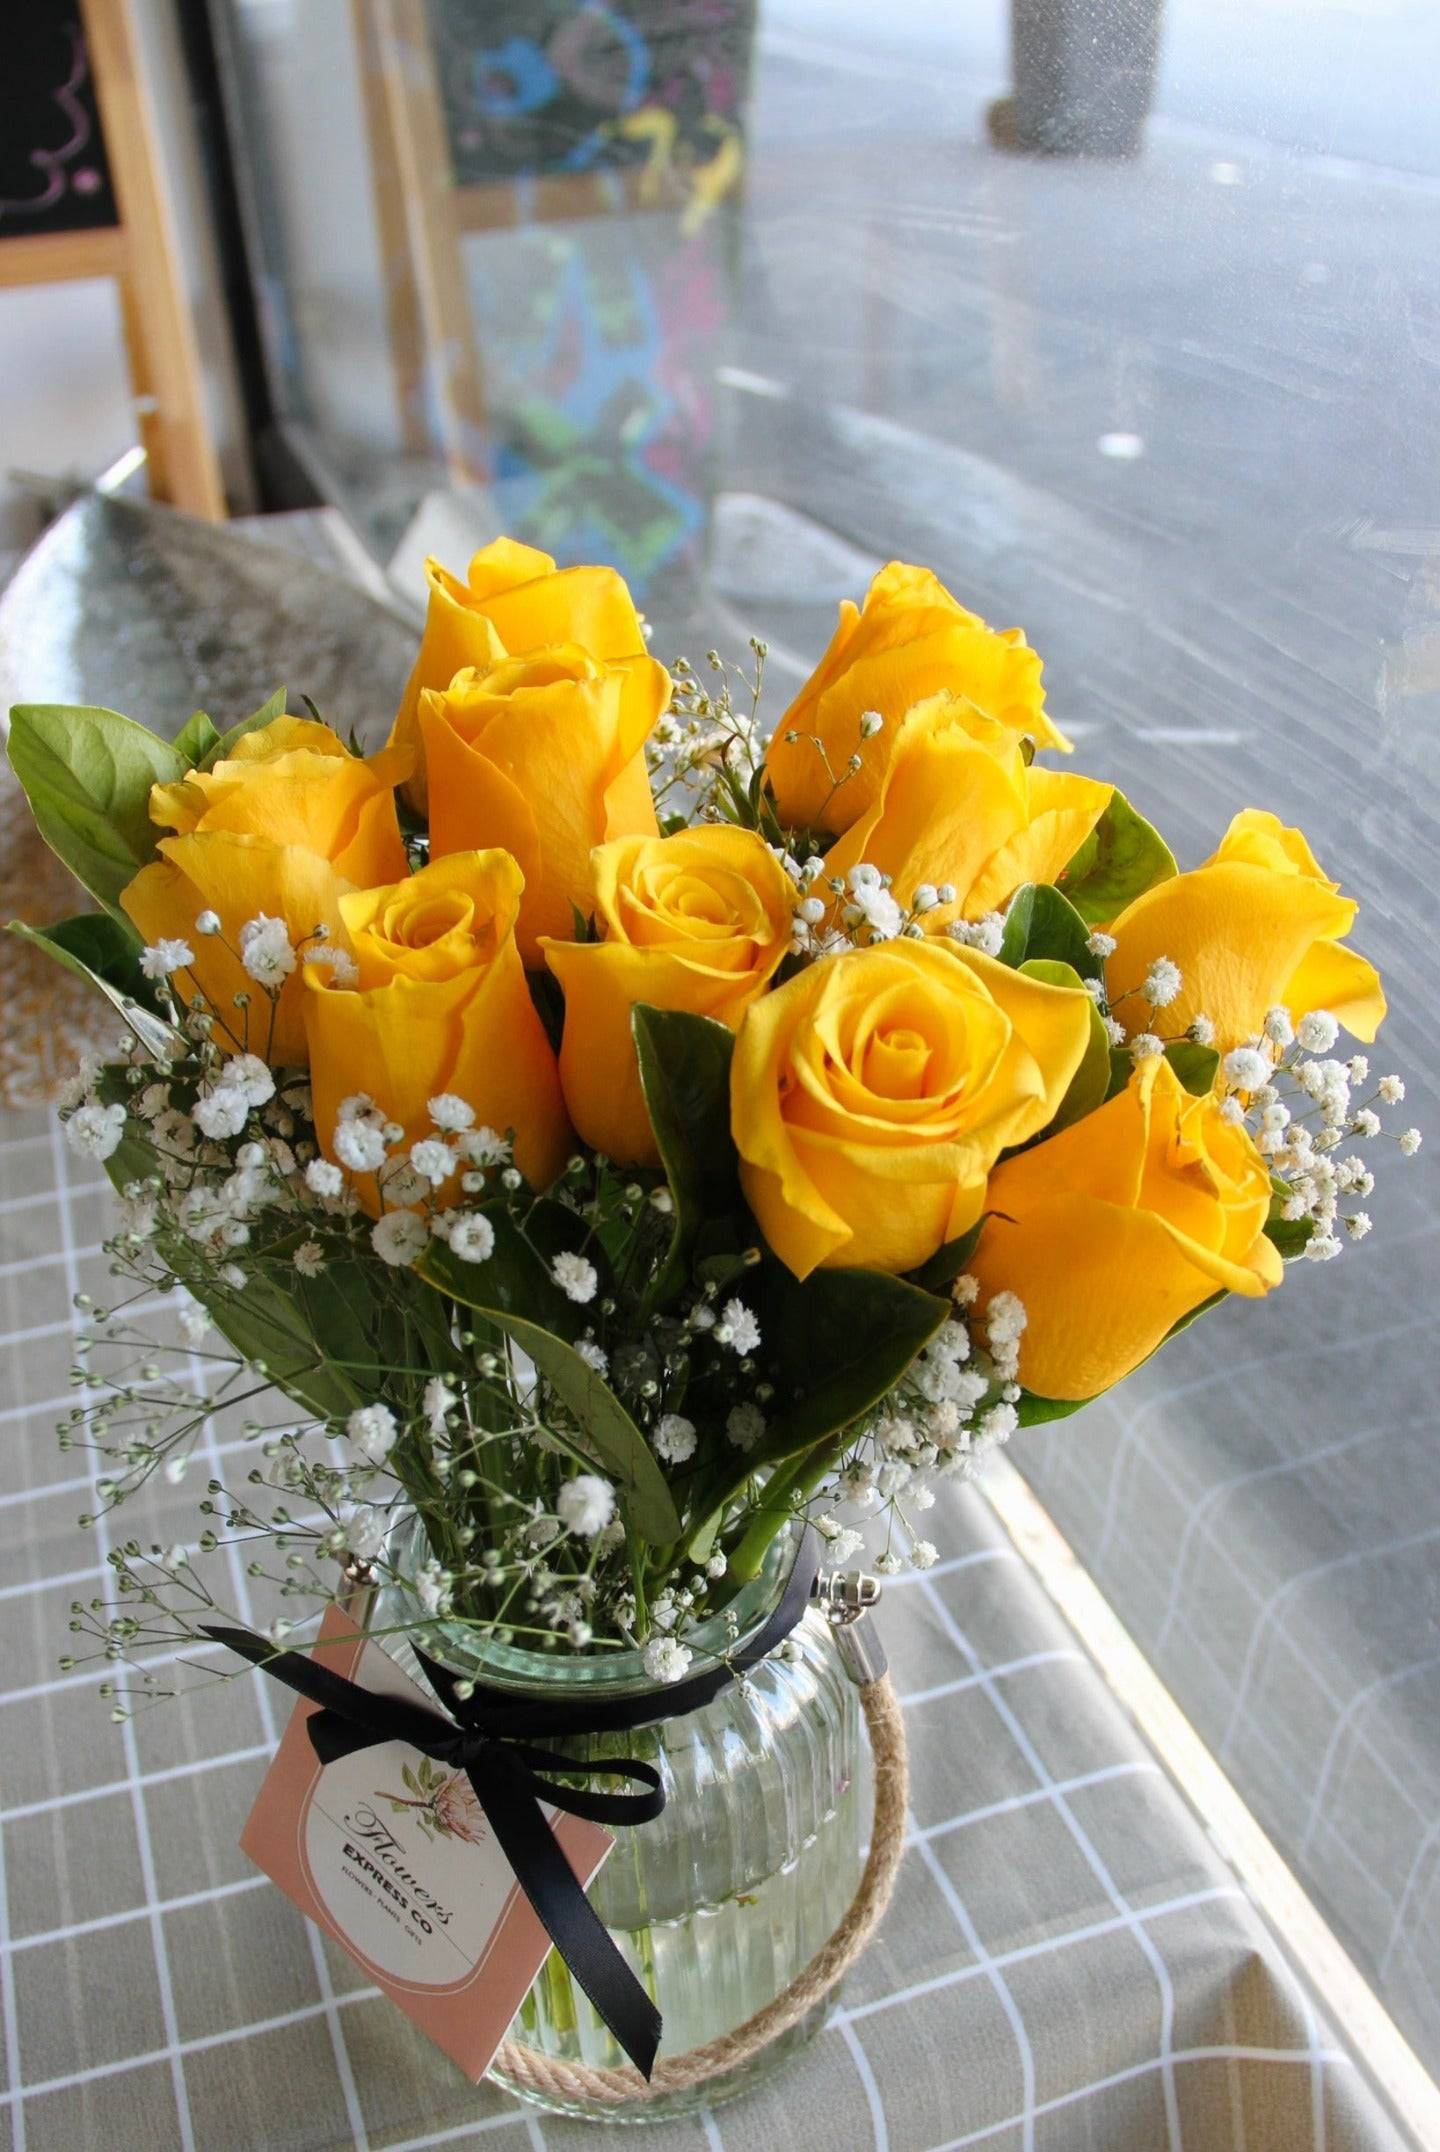 A bouquet of 10 yellow roses arranged in a glass jar, to be delivered in Melbourne.